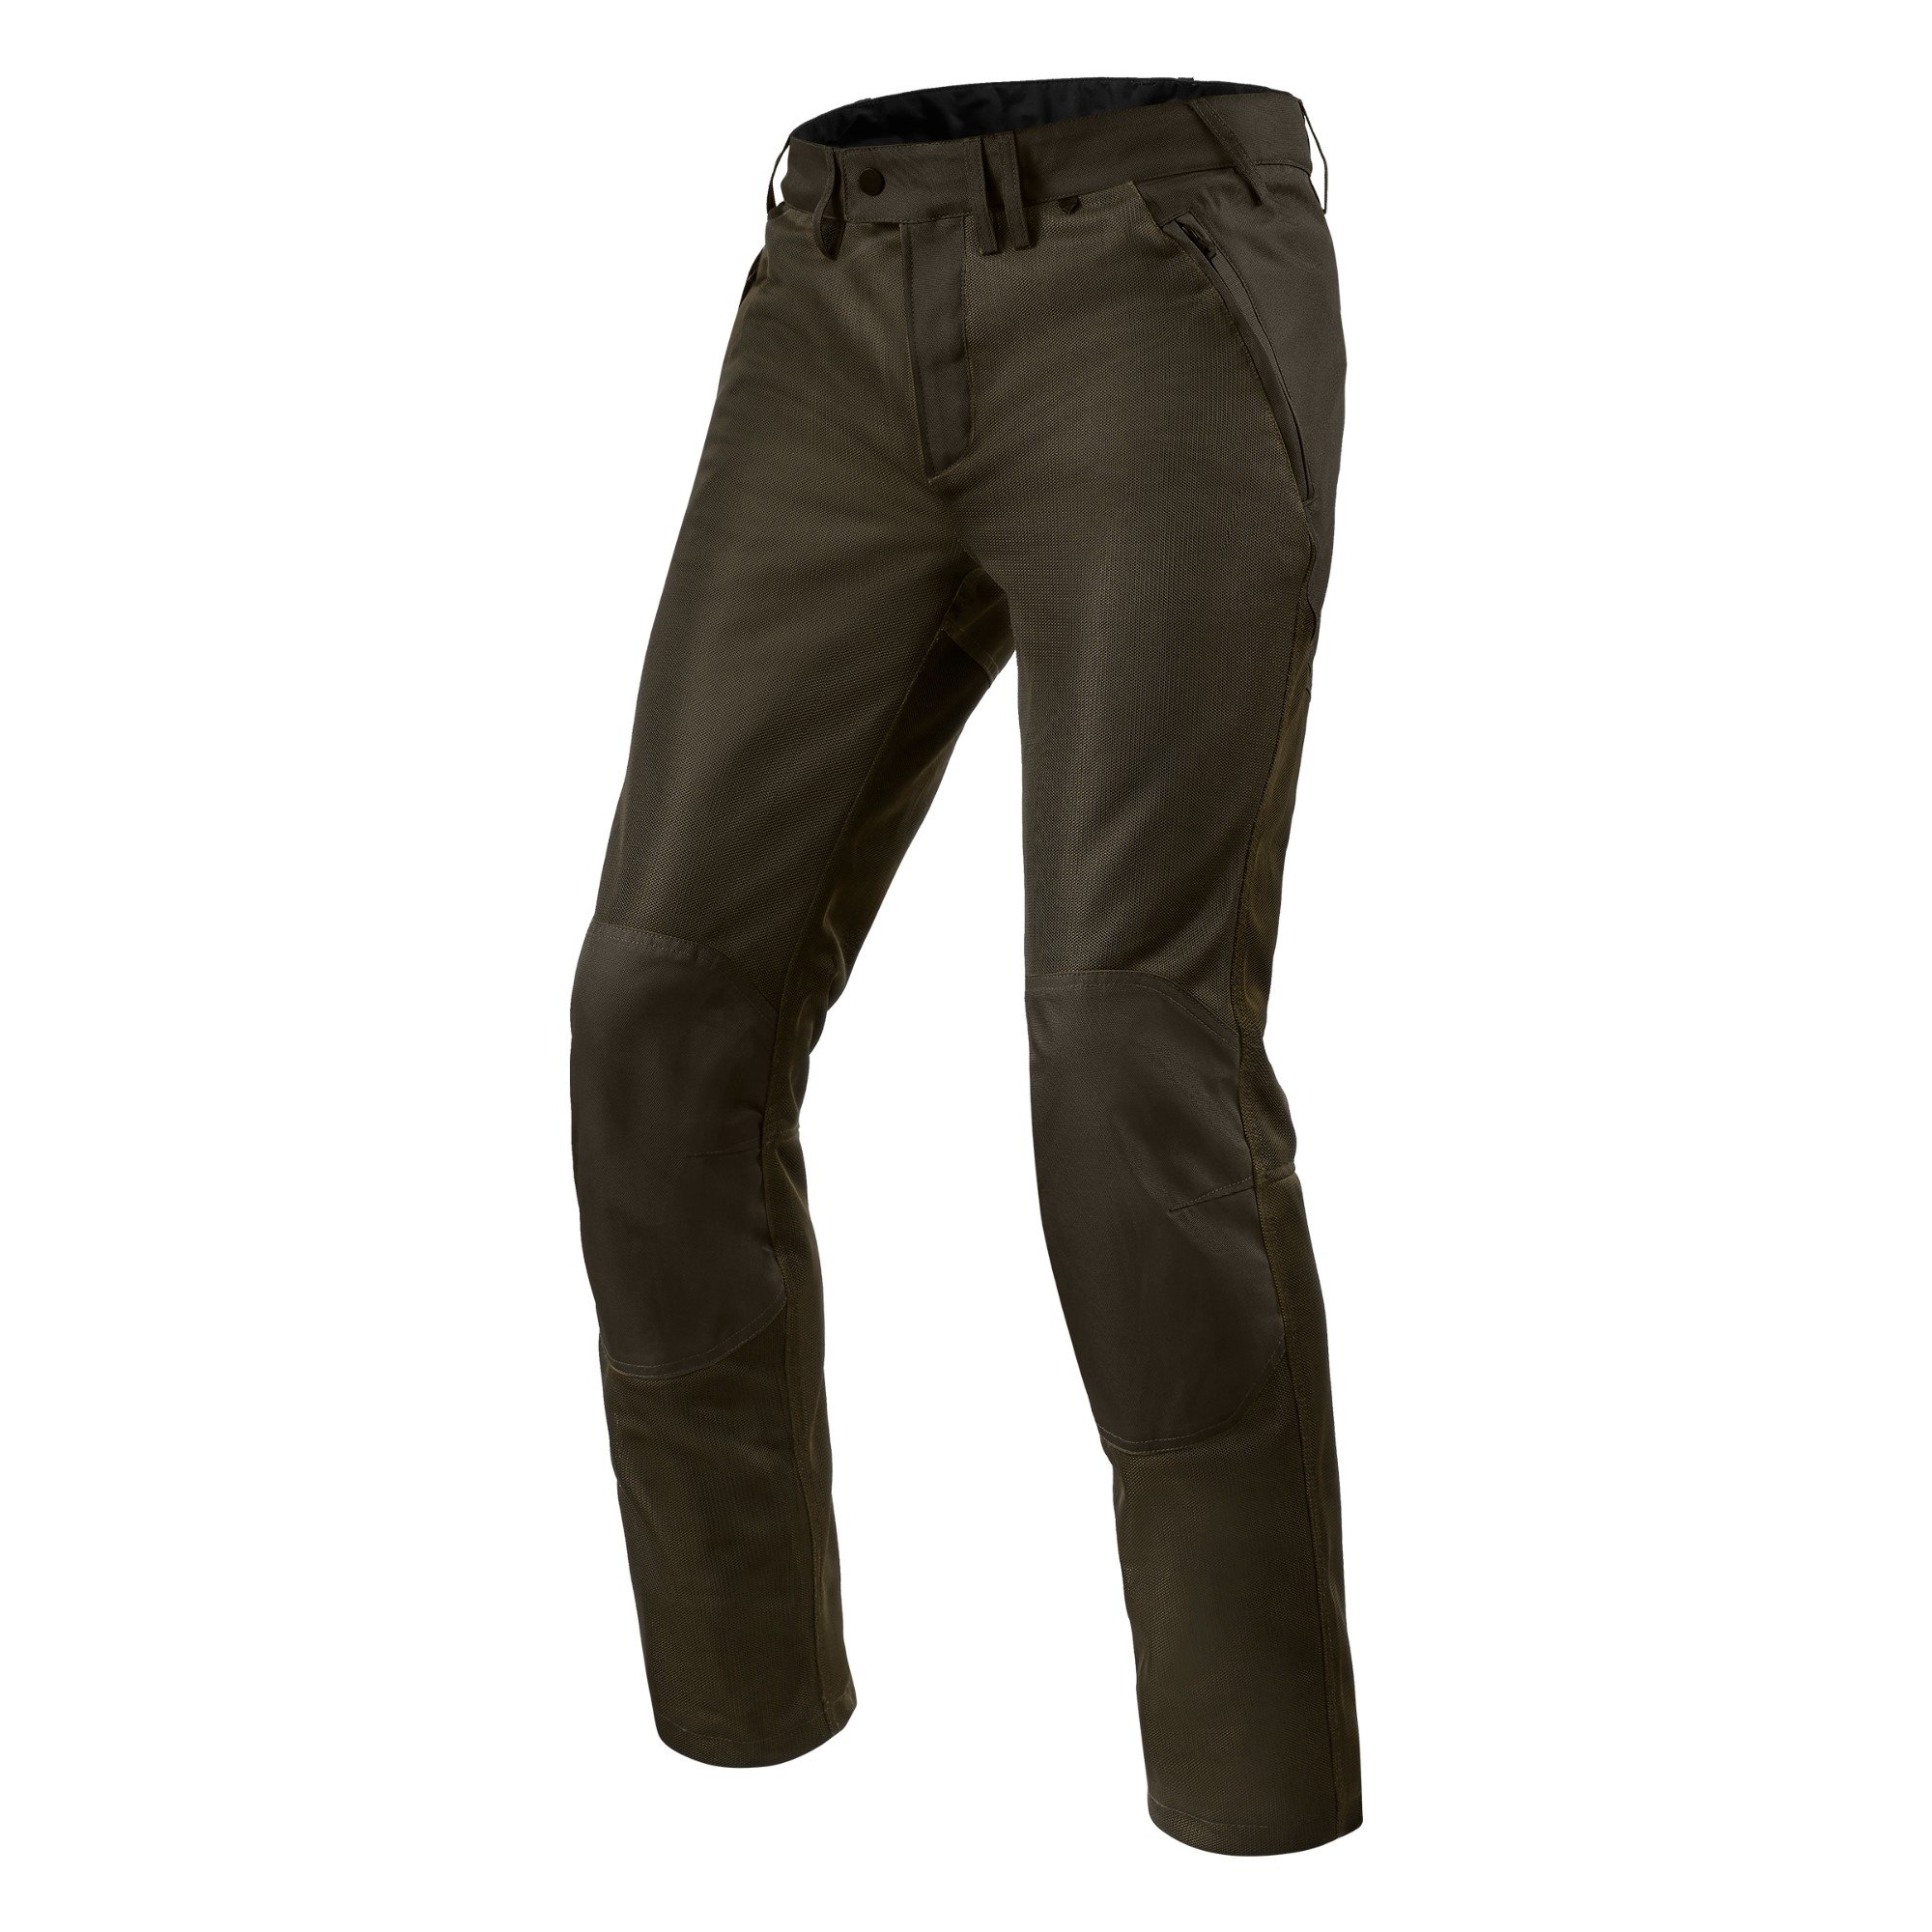 Image of REV'IT! Pants Eclipse 2 Black Olive Long Motorcycle Pants Size 3XL ID 8700001368902